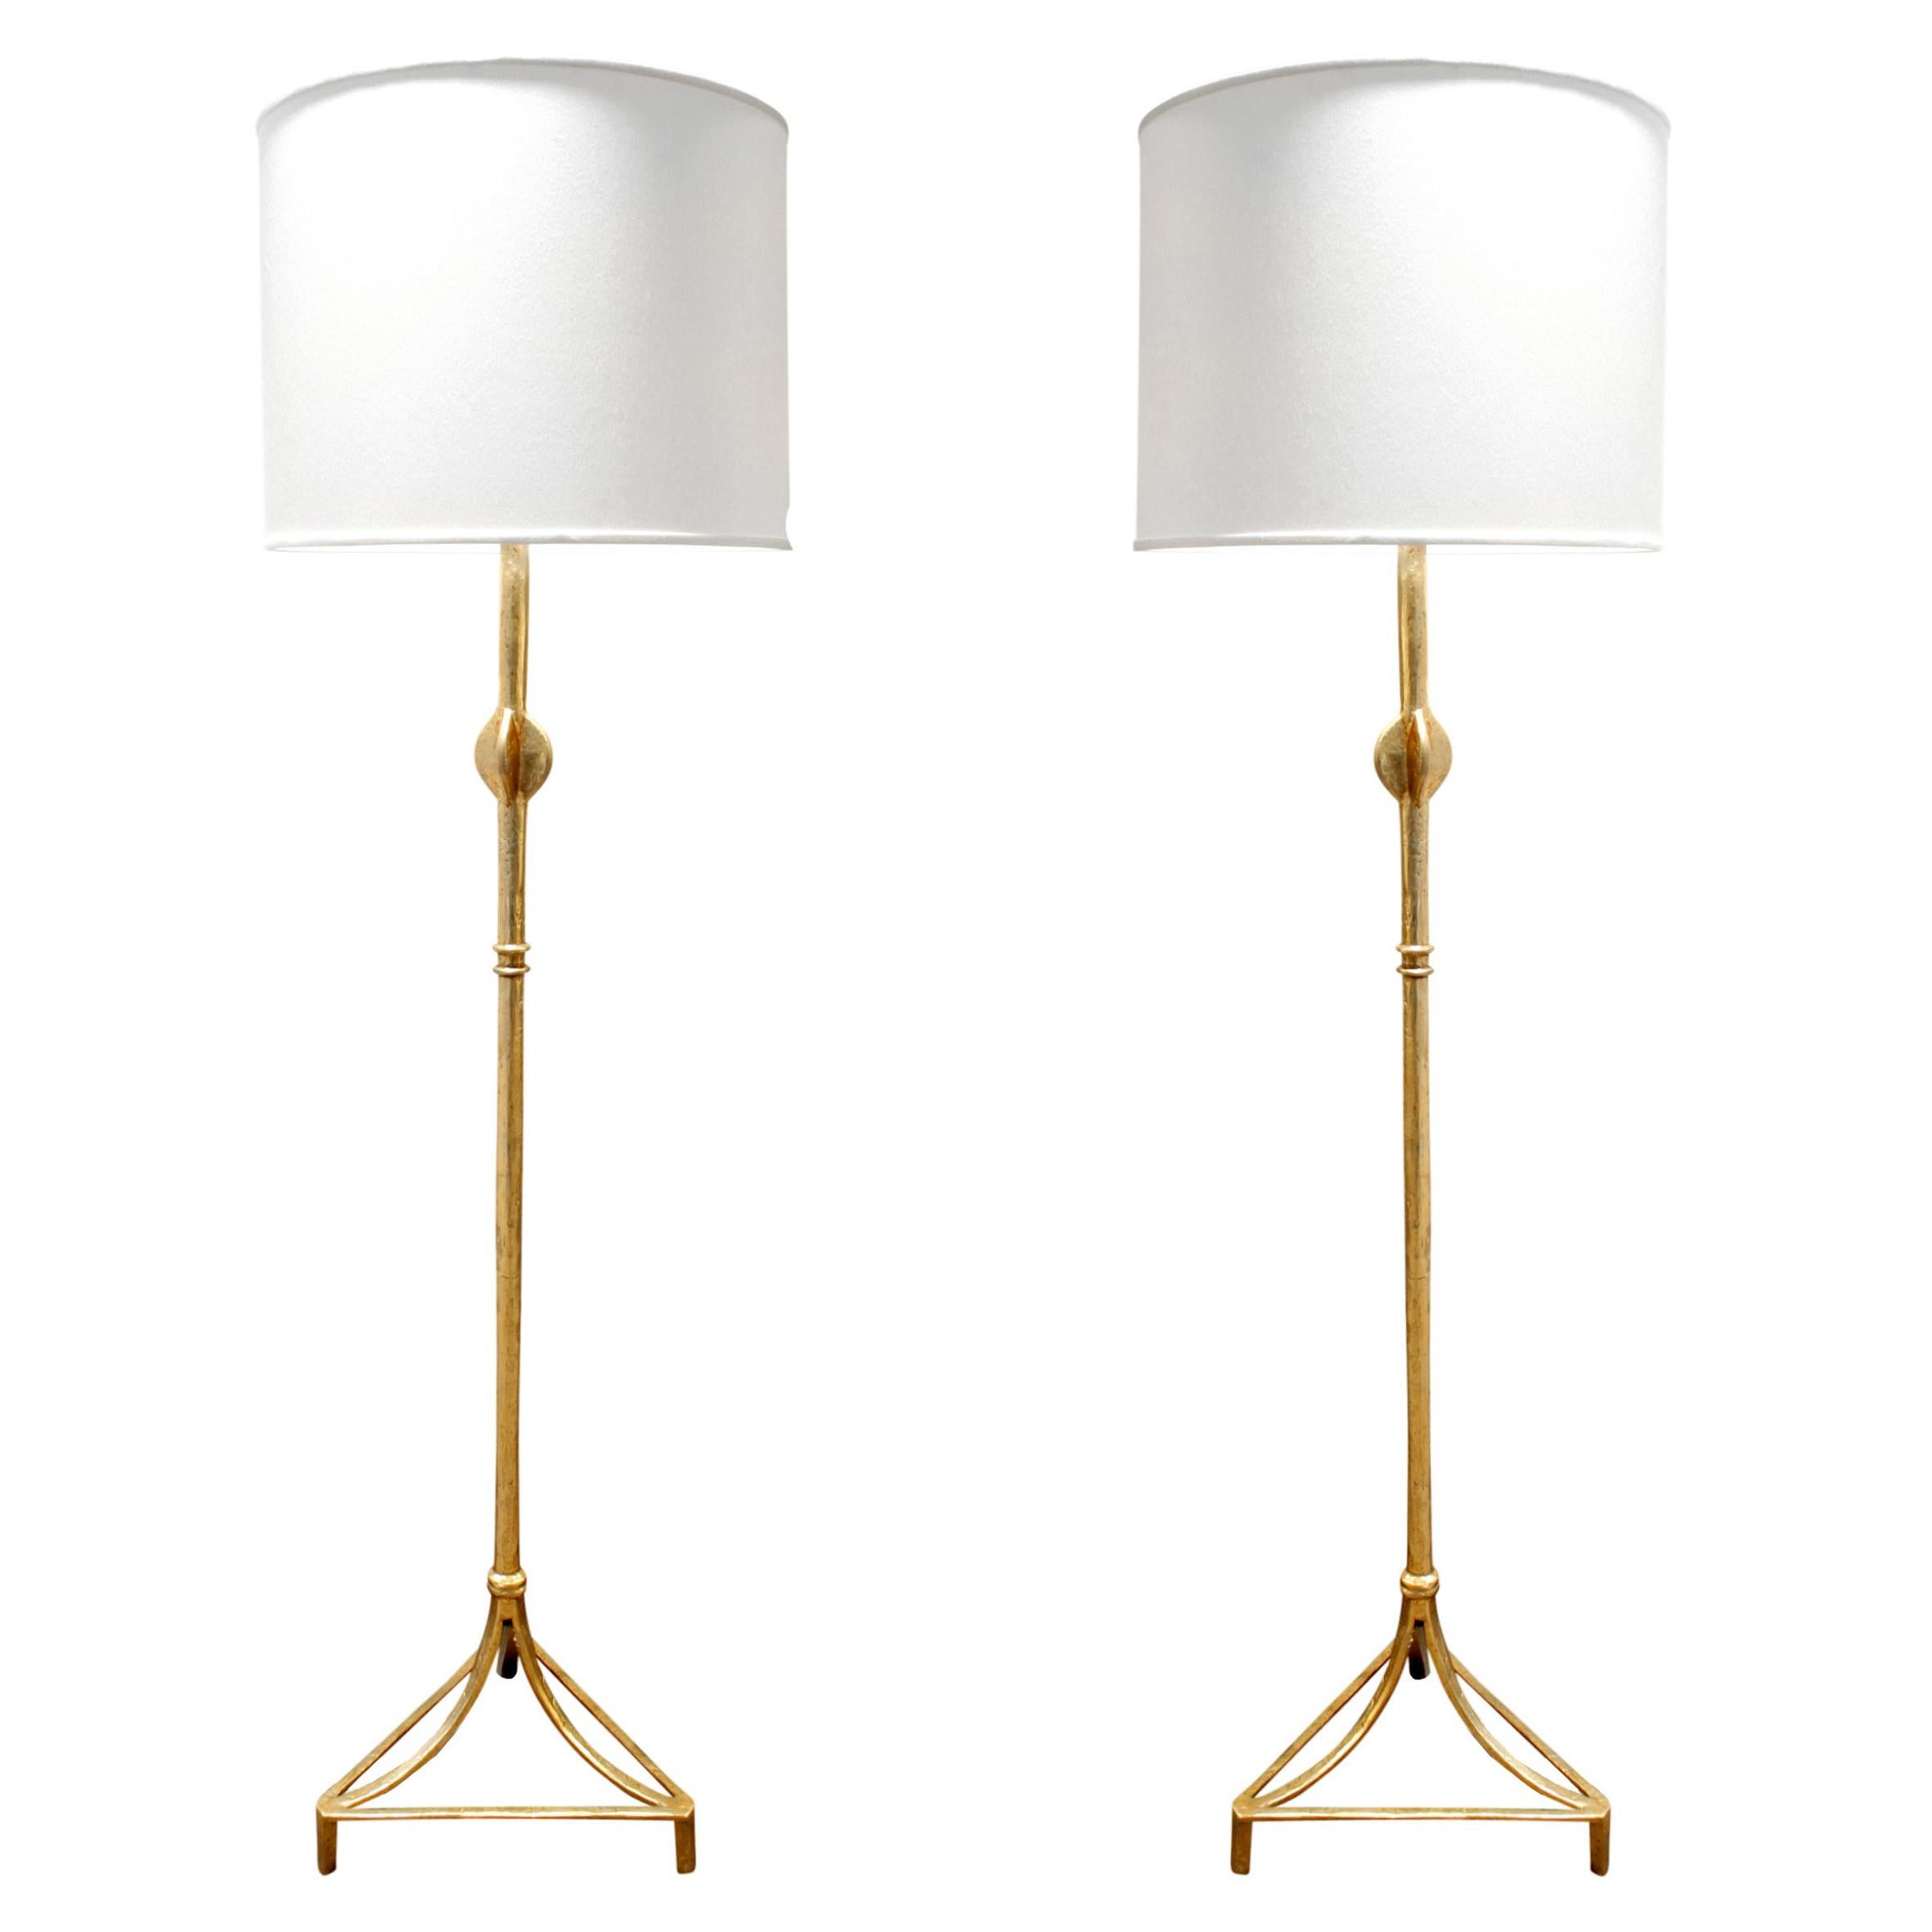 Pair of Custom Giacometti Style Gilded Floor Lamps, 1970s